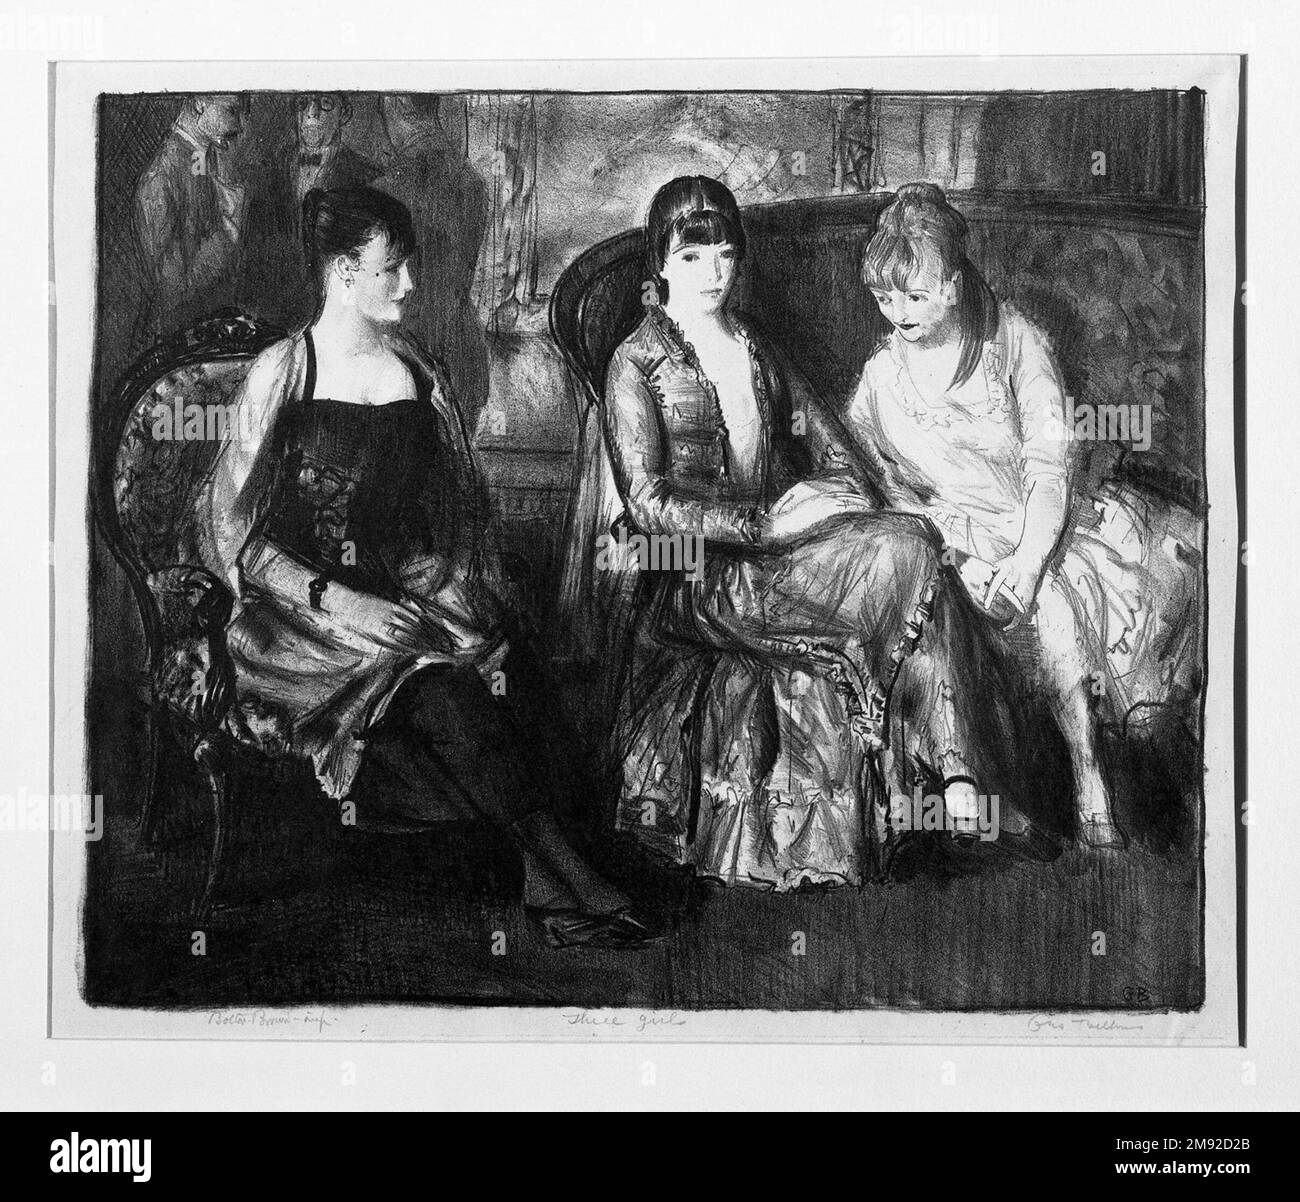 Elsie, Emma and Marjorie, Second Stone George Wesley Bellows (American, 1882-1925). , 1921. Lithograph on thin gray China paper, Sheet: 13 x 15 9/16 in. (33 x 39.5 cm).  Eugene and Elsie Speicher and Robert and Marjorie Henri were close friends of George and Emma Bellows’s and appear often in lithographs that Bellows made in 1921. Here the women enjoy an intimate conversation on the settee in the Bellowses’ sitting room, while the husbands converse in the background. One of the most talented of Henri’s students, Bellows quickly became a popular member of the Henri circle. Speicher (1883–1962) Stock Photo